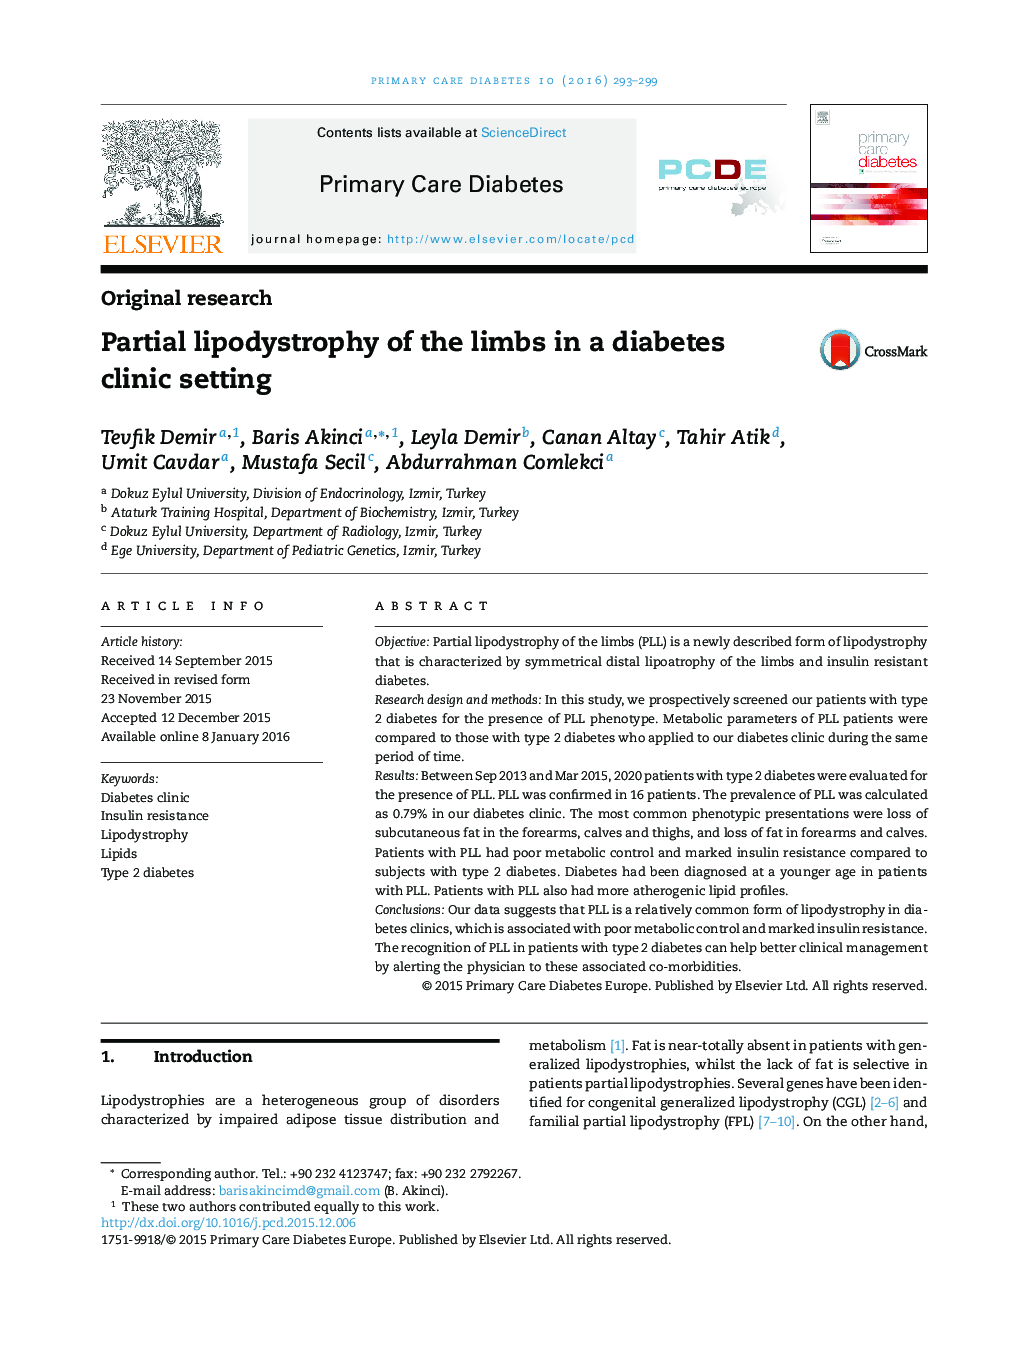 Partial lipodystrophy of the limbs in a diabetes clinic setting